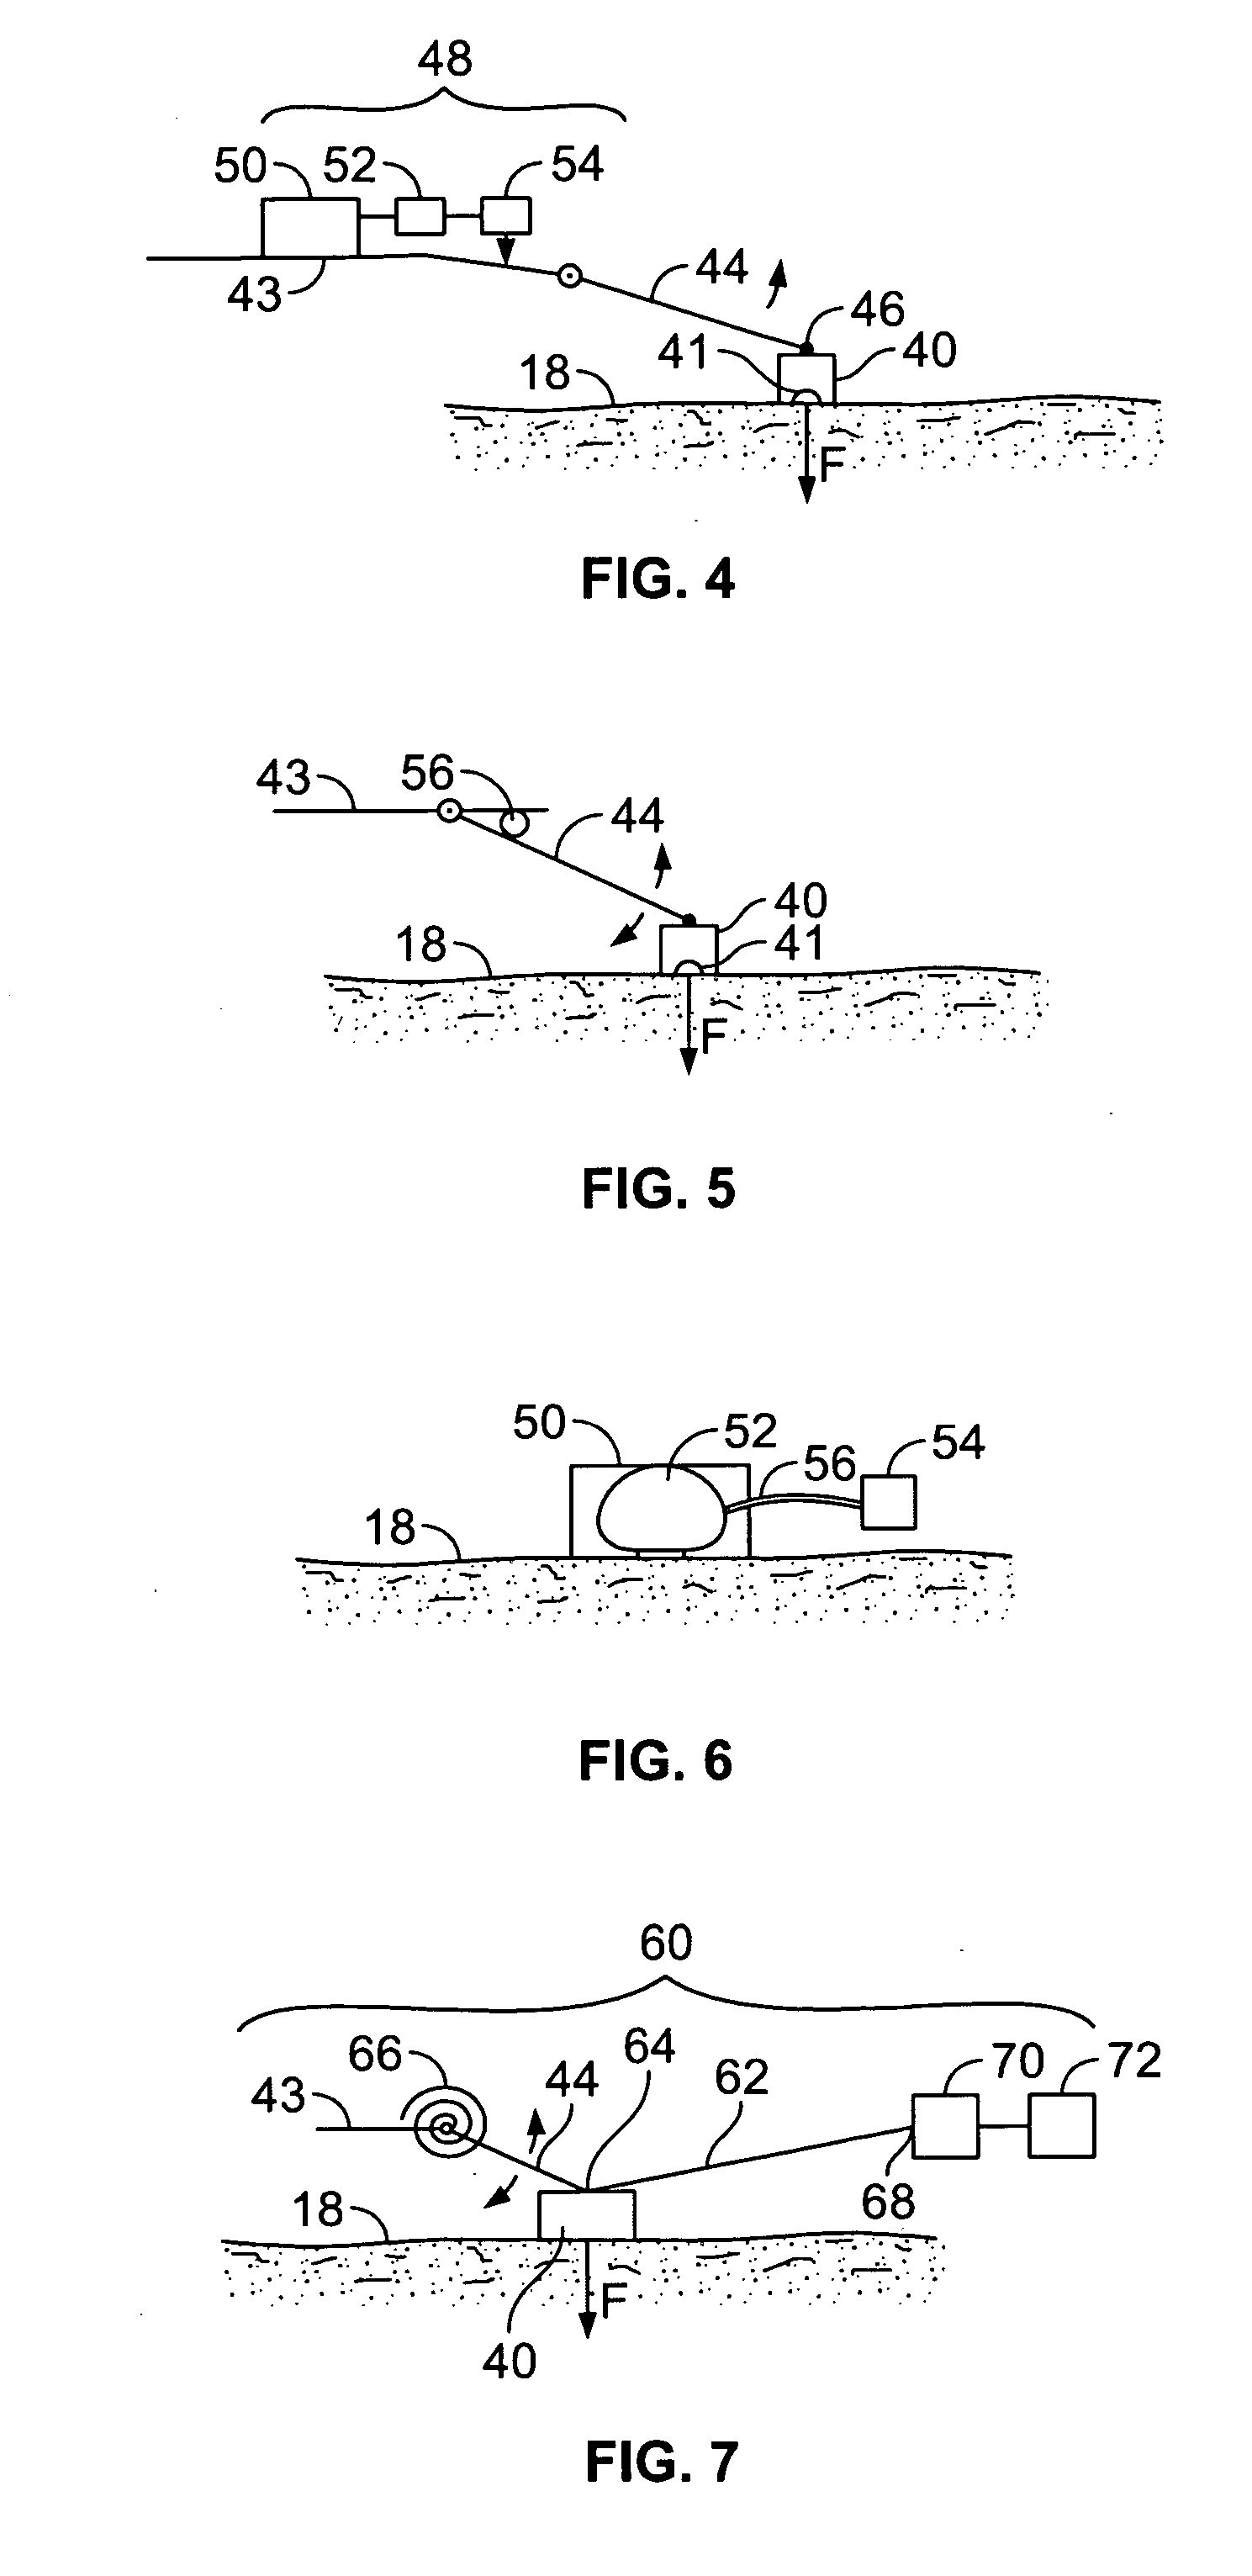 System and method for improving the functionality of prostheses